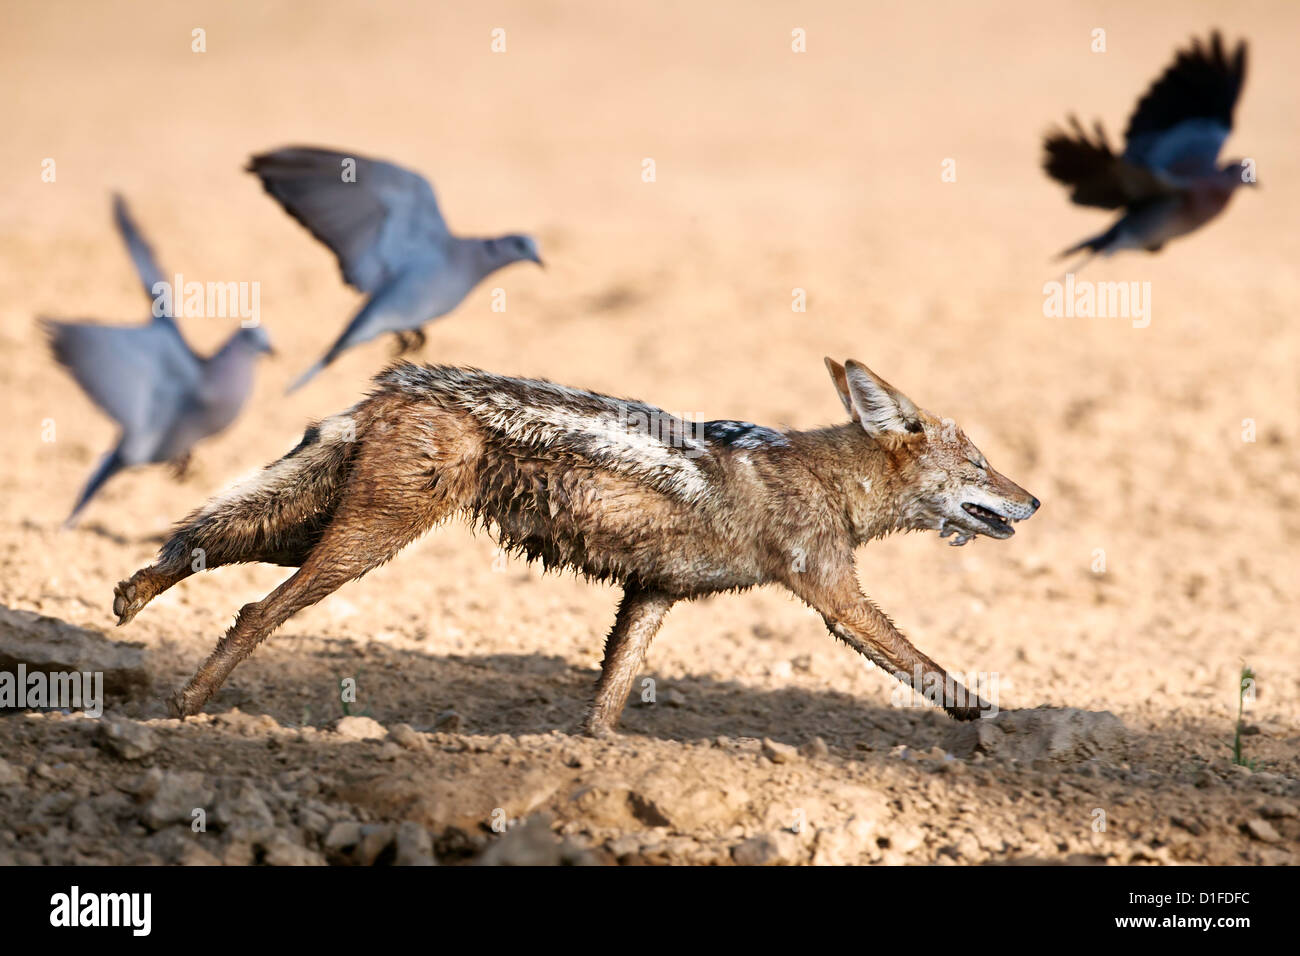 Blackbacked jackal (Canis mesomelas) chasing doves, Kgalagadi Transfrontier Park, South Africa, Africa Stock Photo